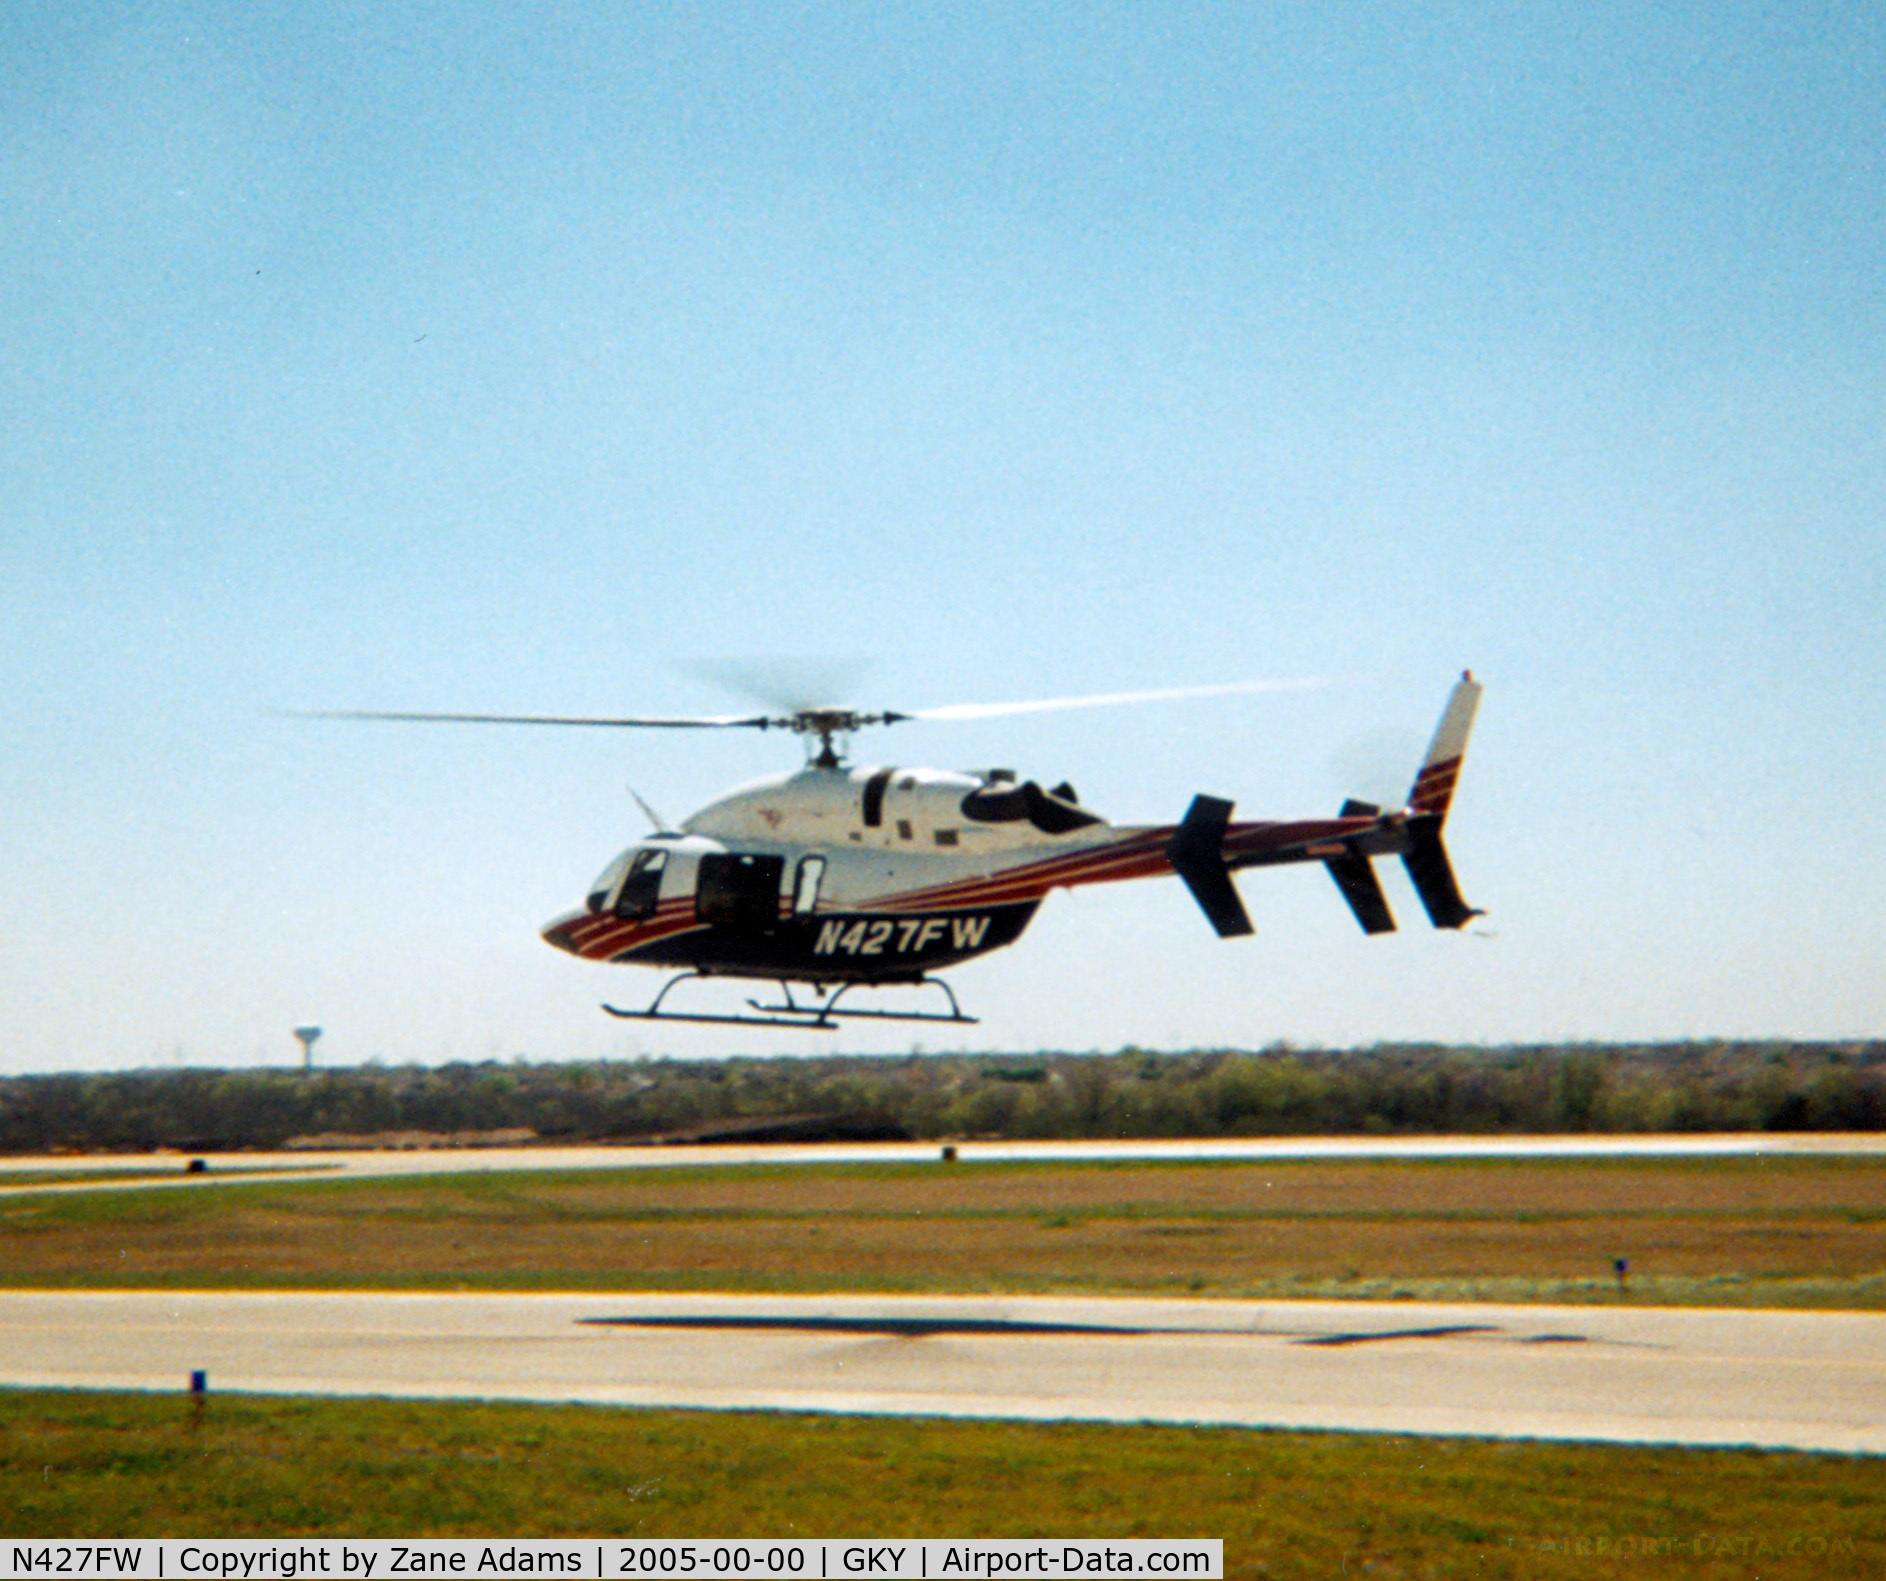 N427FW, 2001 Bell 427 C/N 56002, Bell Helicopter company photo ship during BA-609 (N609TR) flight testing